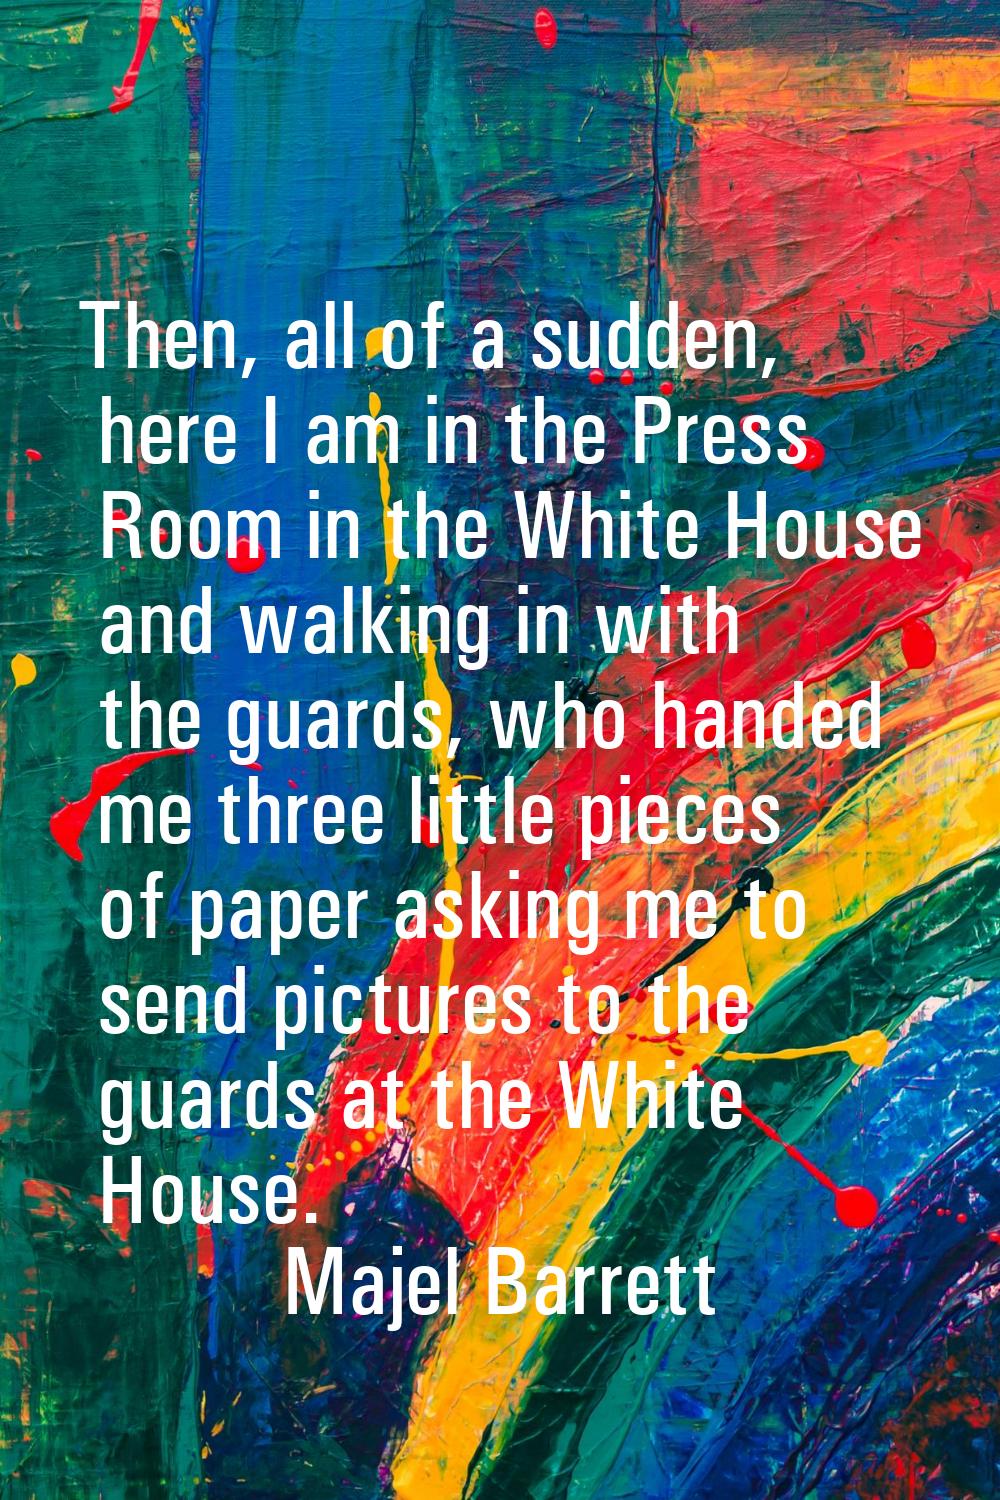 Then, all of a sudden, here I am in the Press Room in the White House and walking in with the guard